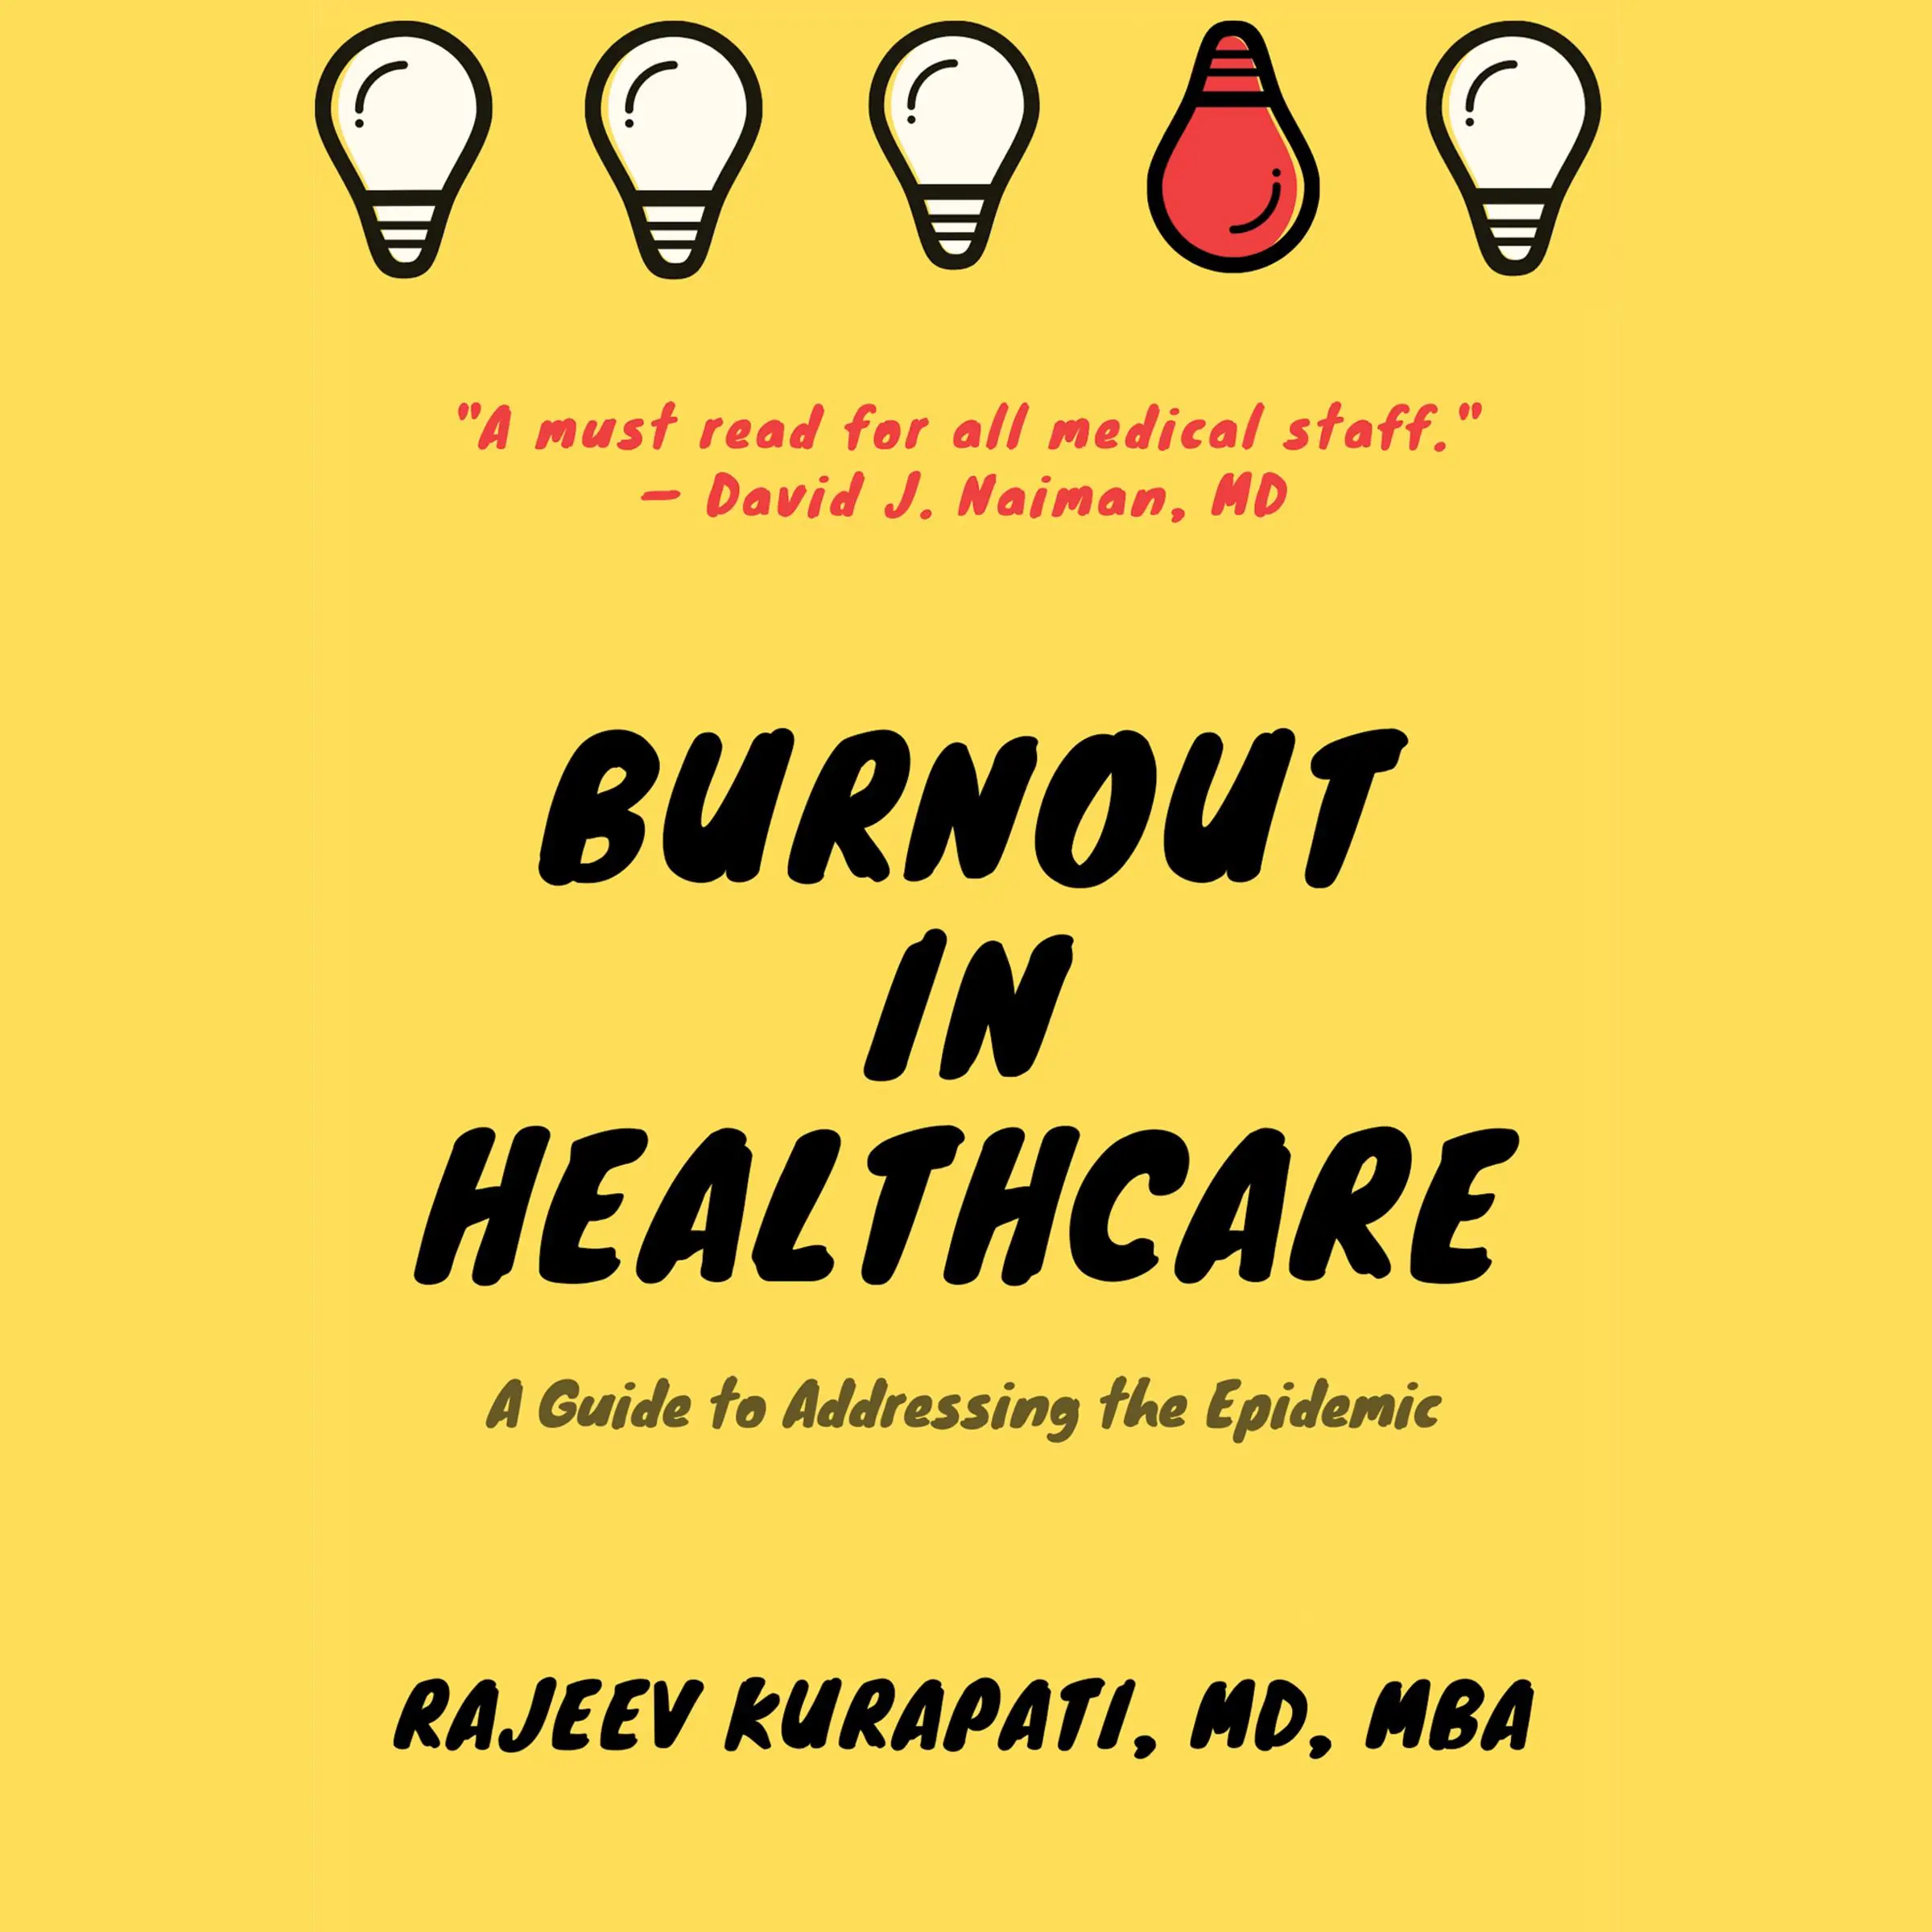 Burnout in Healthcare: A Guide to Addressing the Epidemic Audiobook by Rajeev Kurapati MD